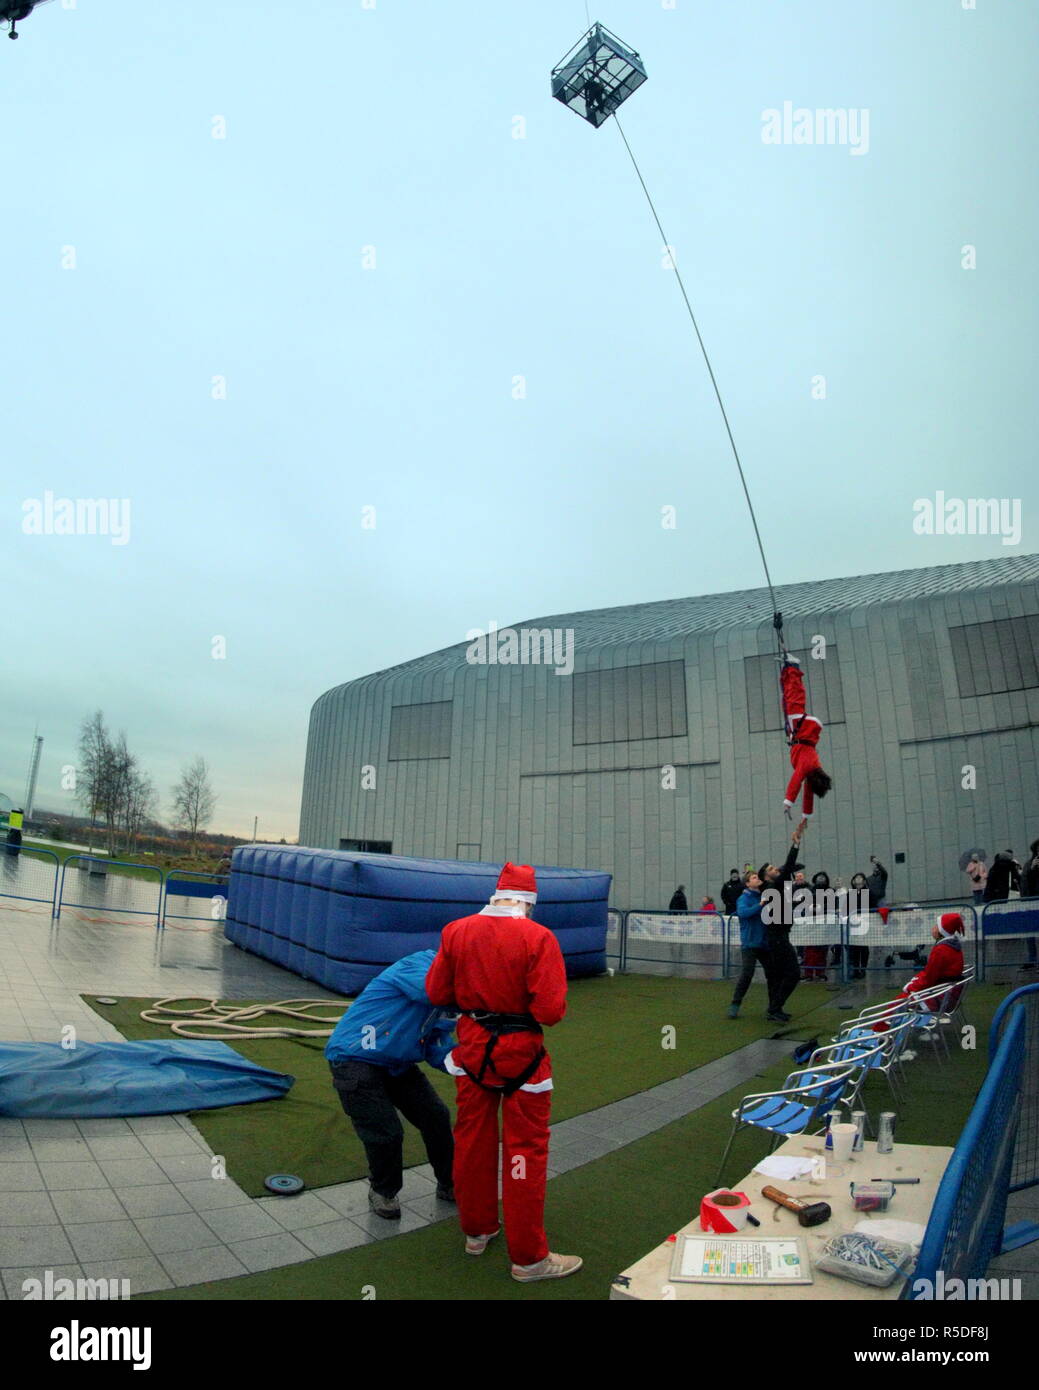 Glasgow, Scotland, UK 1st December, 2018. The annual Riverside Christmas Festival in the  famous city Riverside  transport museum today as well as its markets inside and fairground attractions outside had Christmas Santas aleaping for charity as people bungee jumped in costume for various charities with the uk Bungee club.  Gerard Ferry/Alamy news Credit: gerard ferry/Alamy Live News Stock Photo